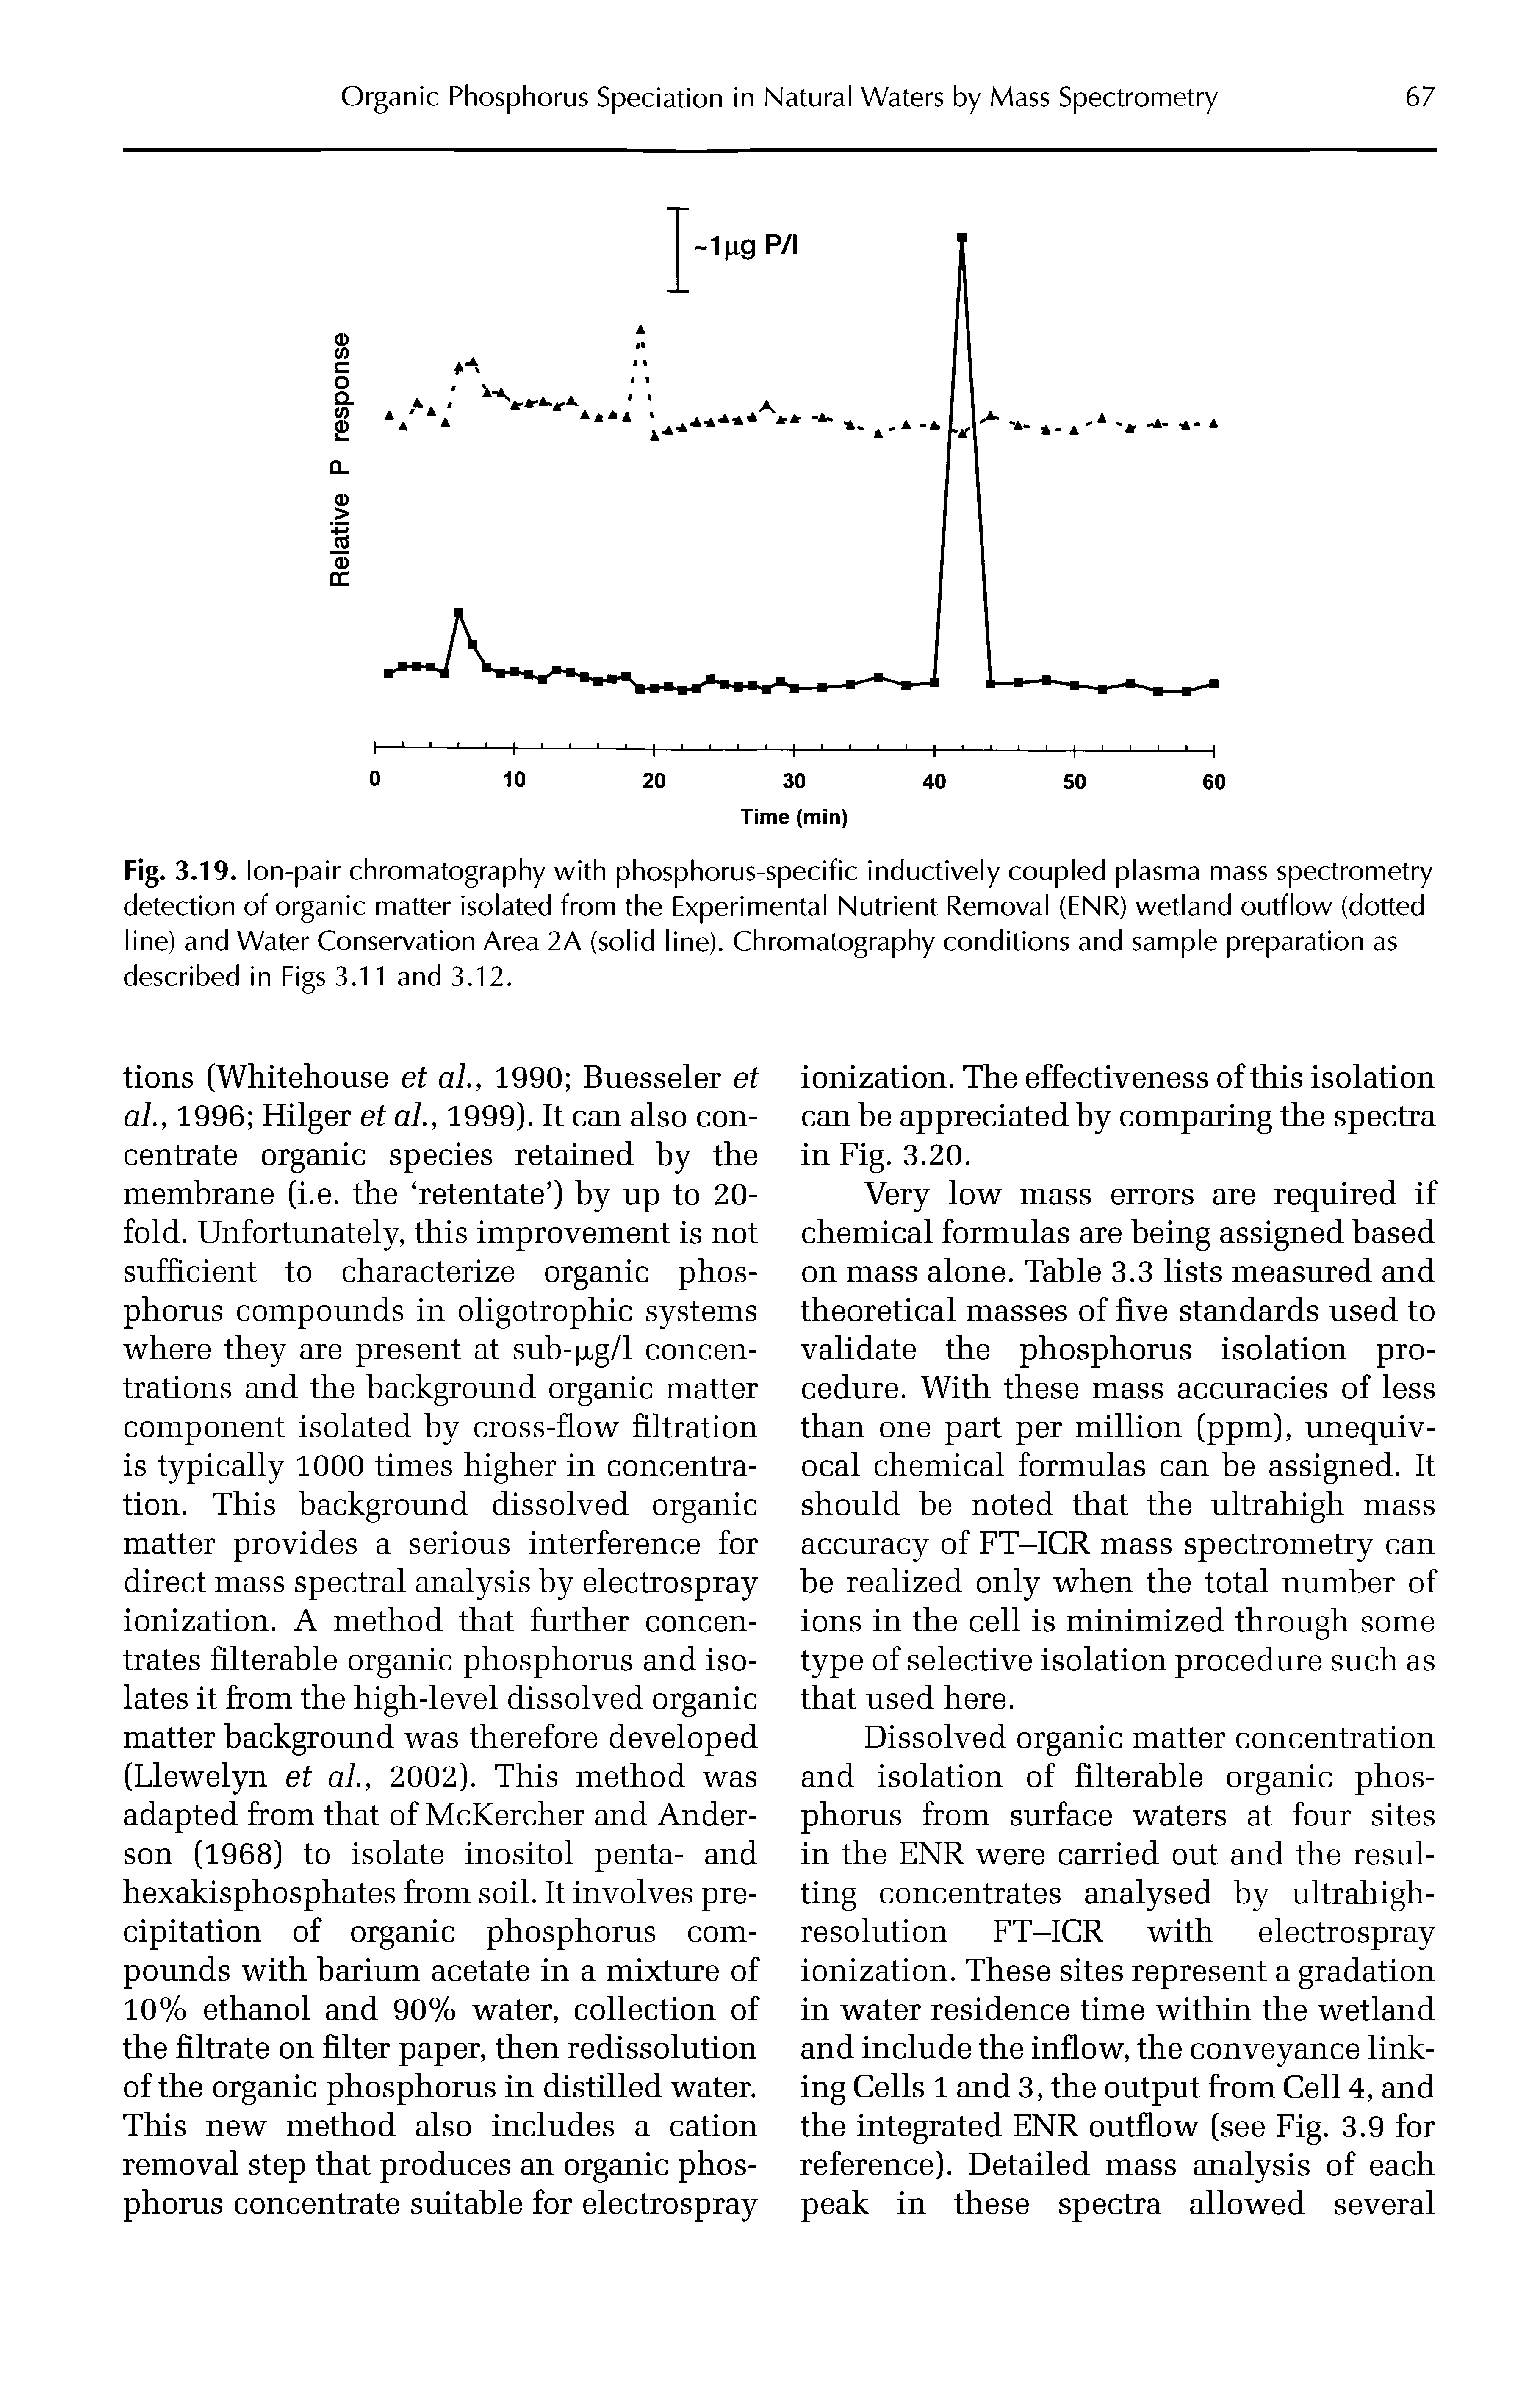 Fig. 3.19. Ion-pair chromatography with phosphorus-specific inductively coupled plasma mass spectrometry detection of organic matter isolated from the Experimental Nutrient Removal (ENR) wetland outflow (dotted line) and Water Conservation Area 2A (solid line). Chromatography conditions and sample preparation as described in Eigs 3.11 and 3.12.